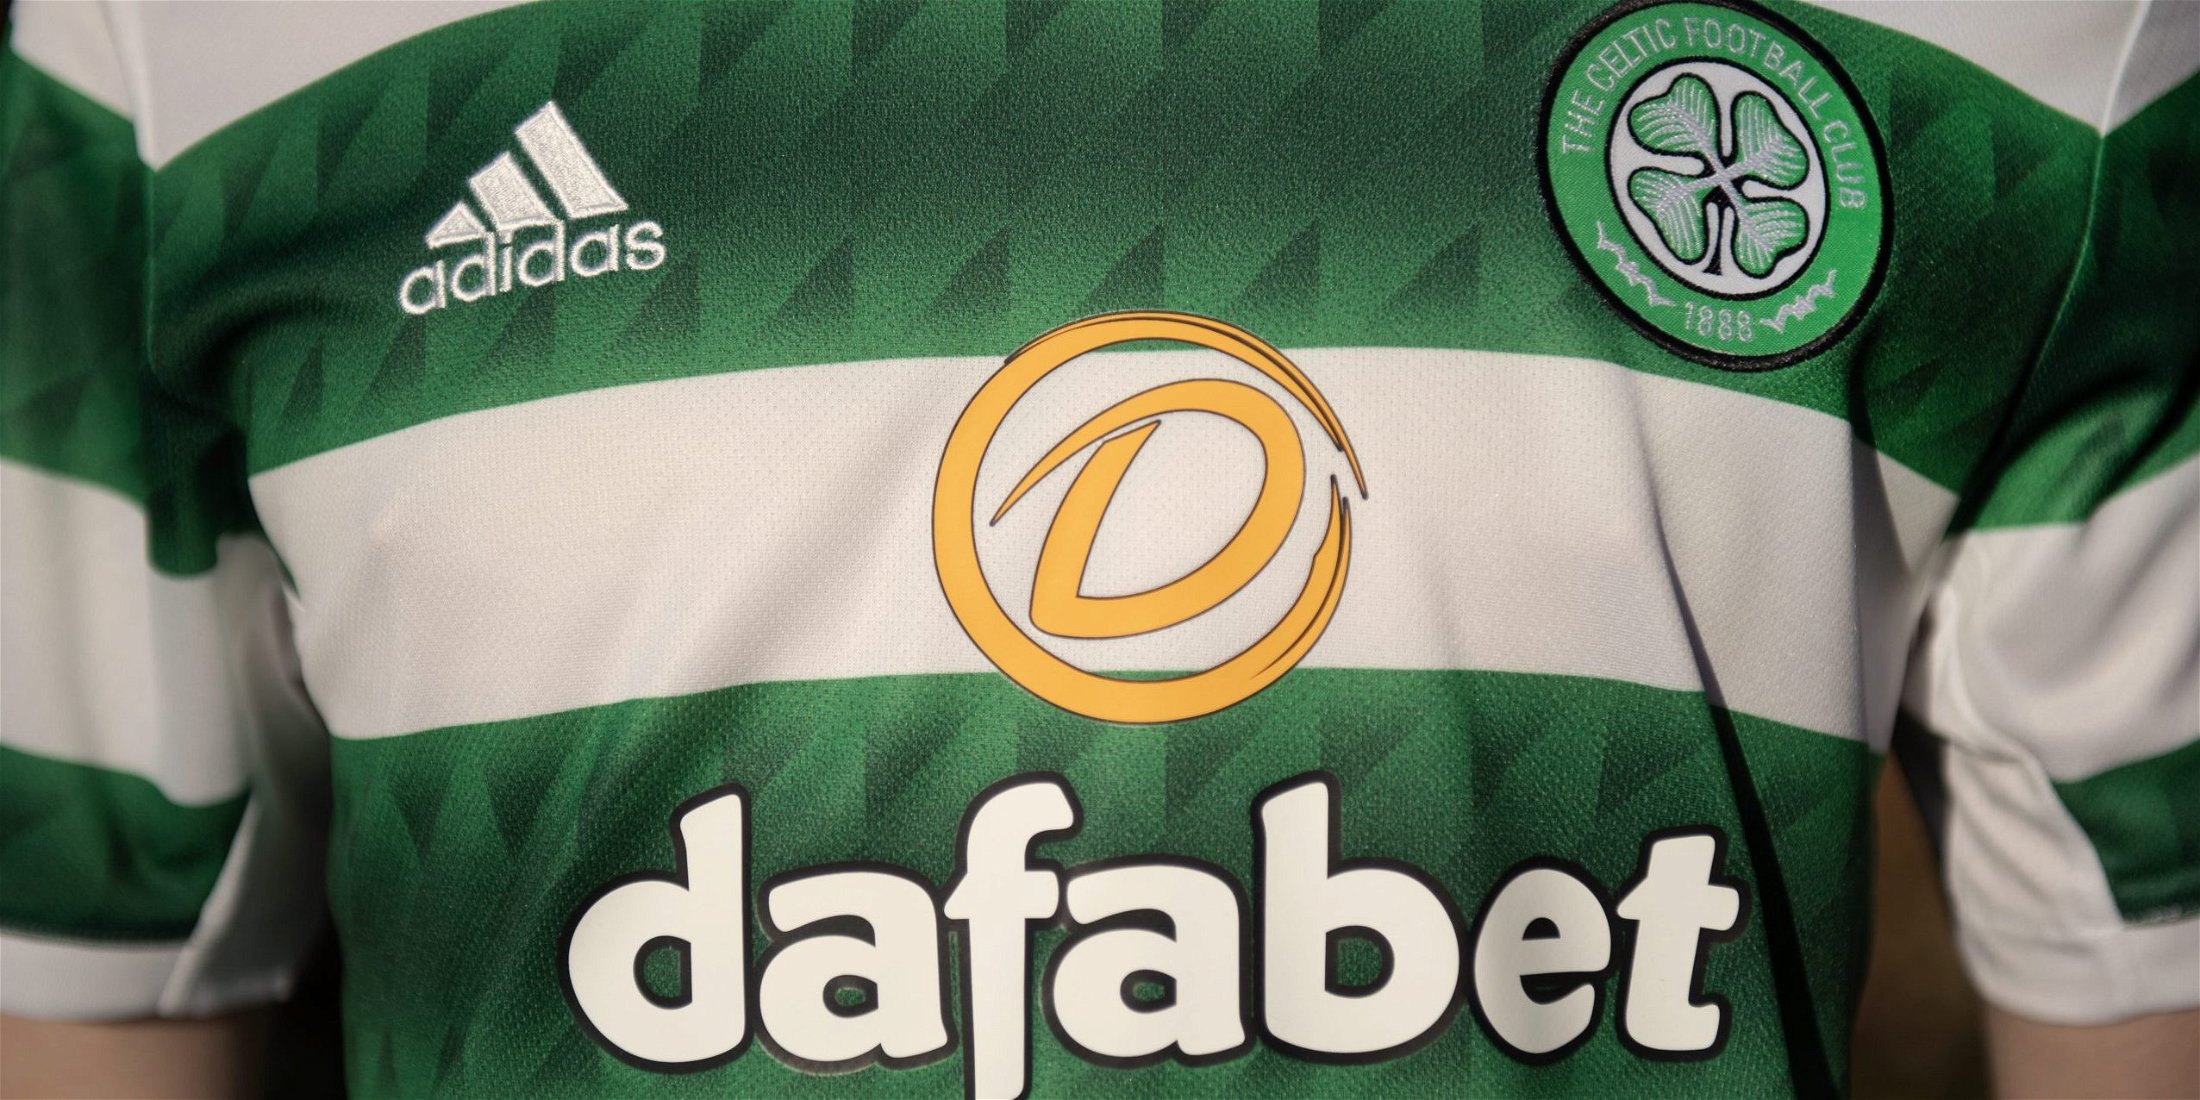 Adidas versus New Balance: Which Celtic jersey is the best since 2015?